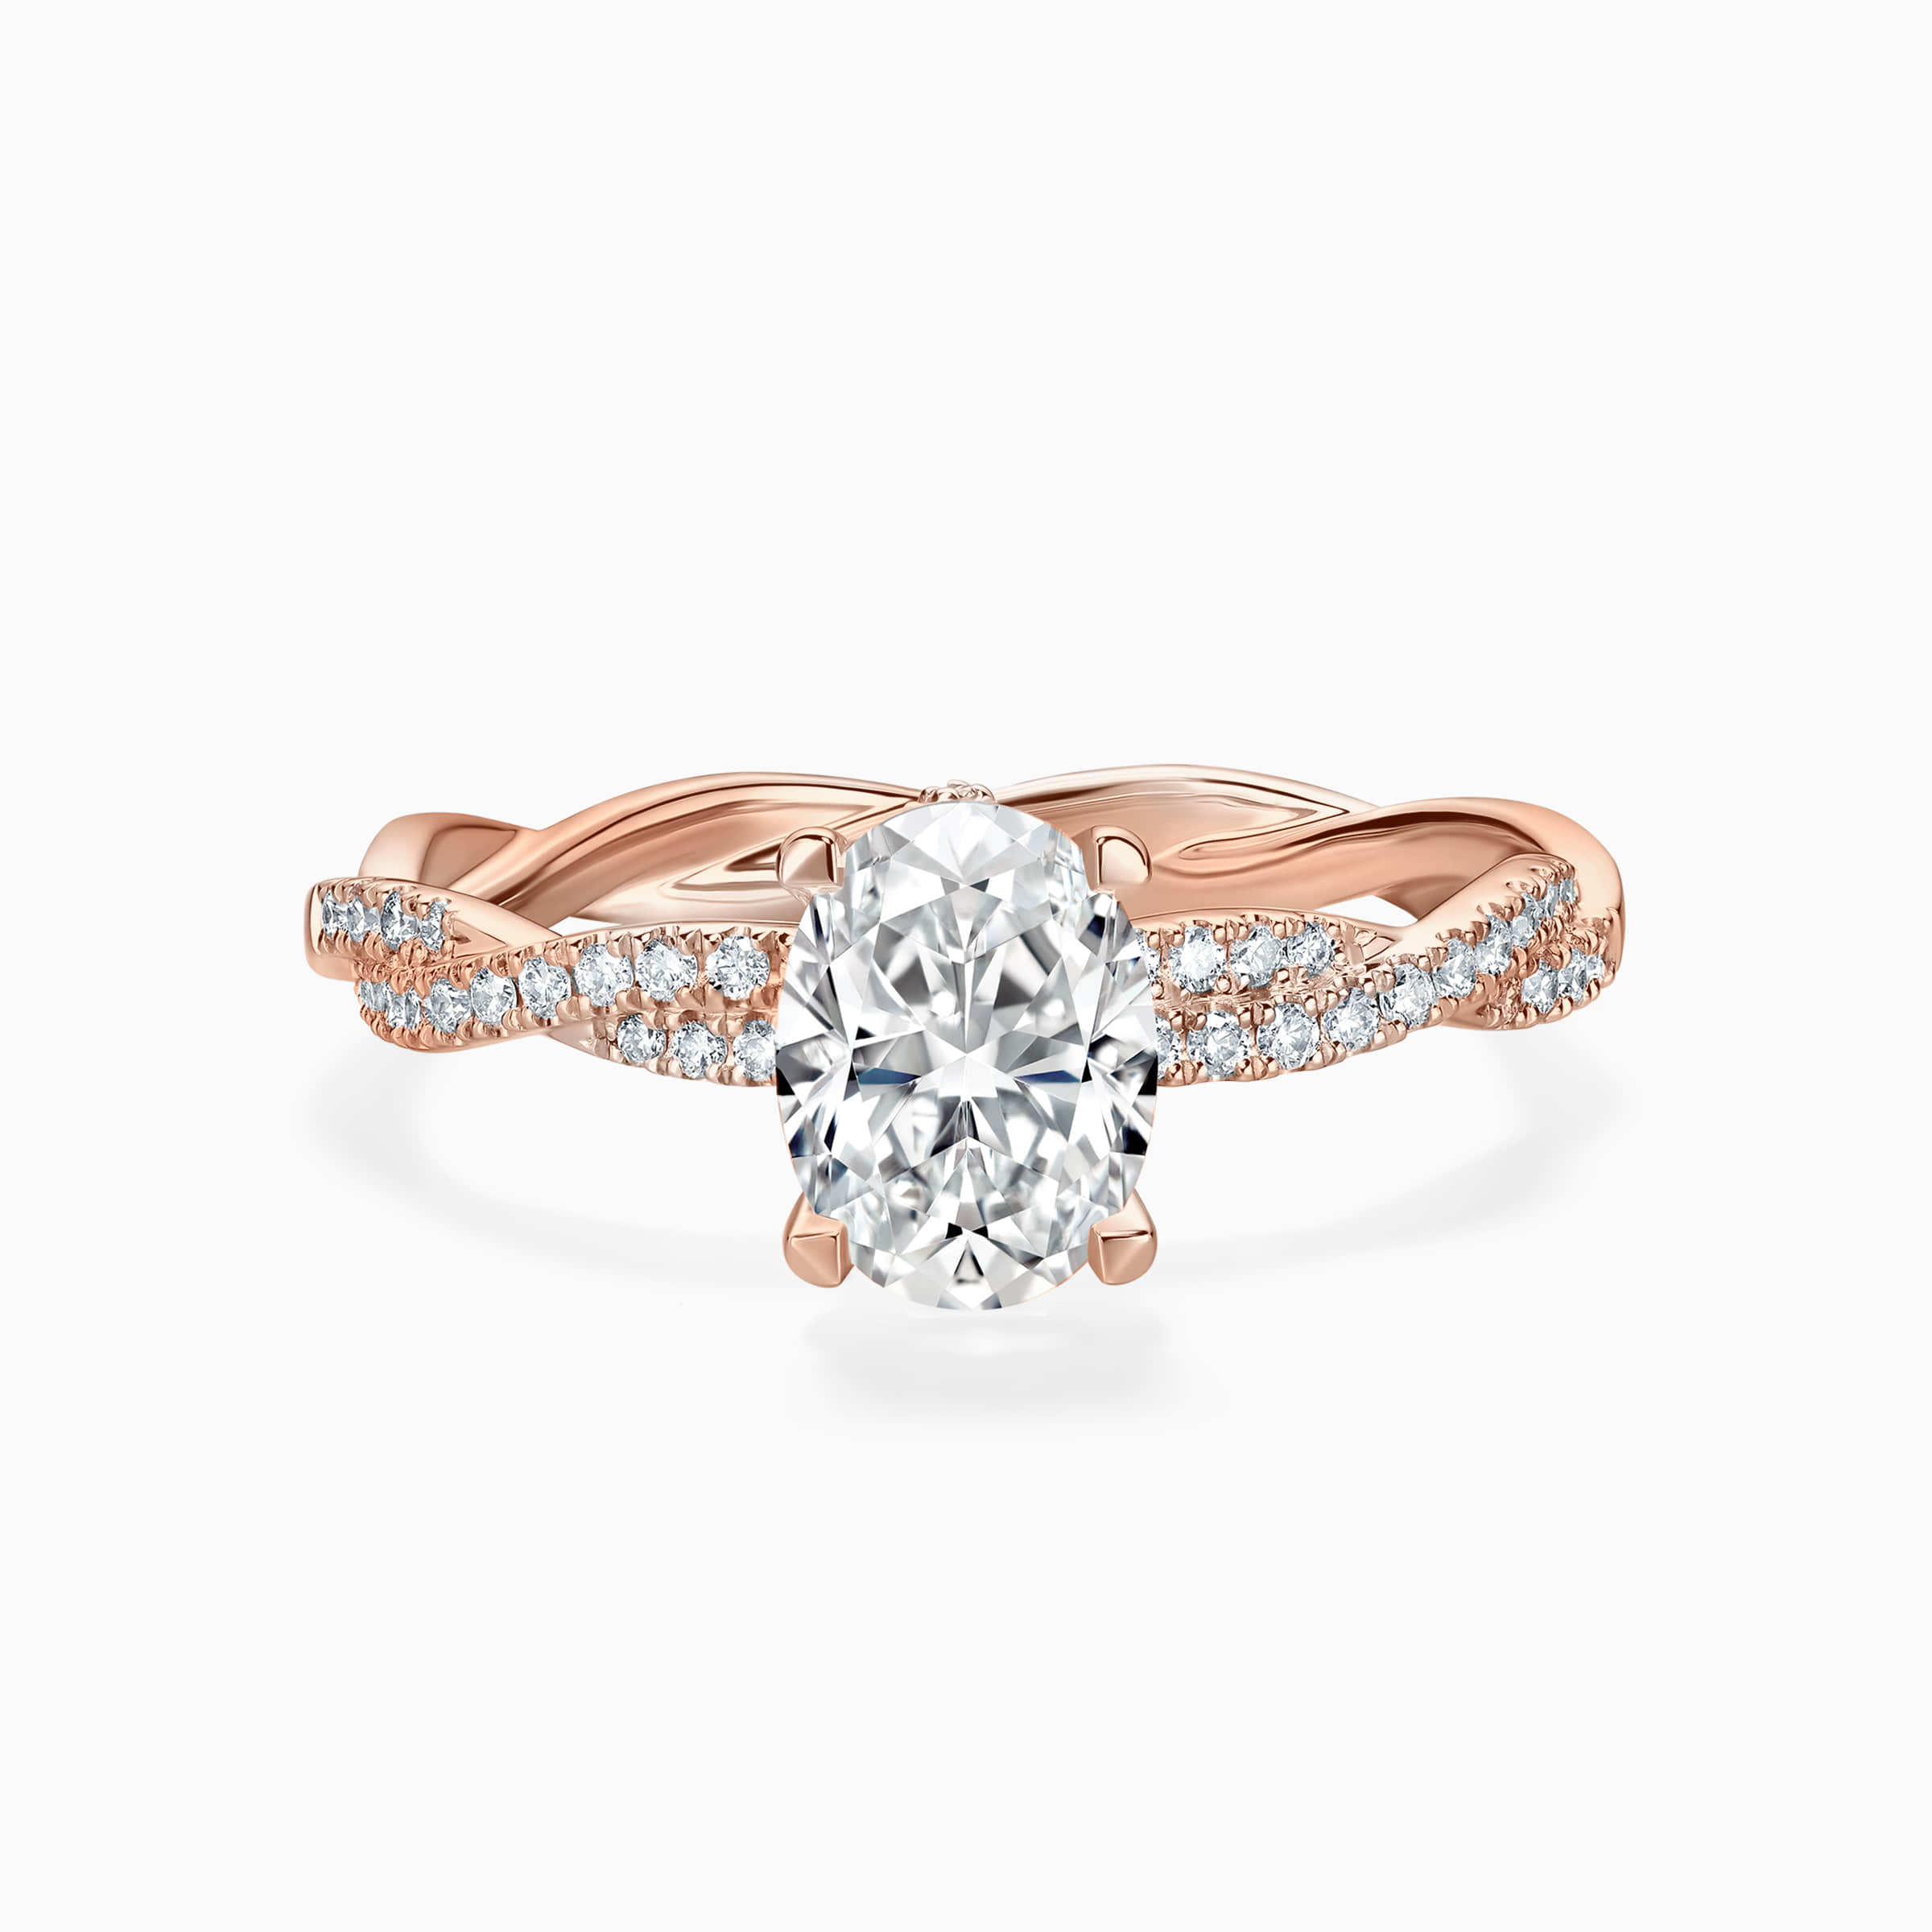 Darry Ring oval diamond engagement ring in rose gold